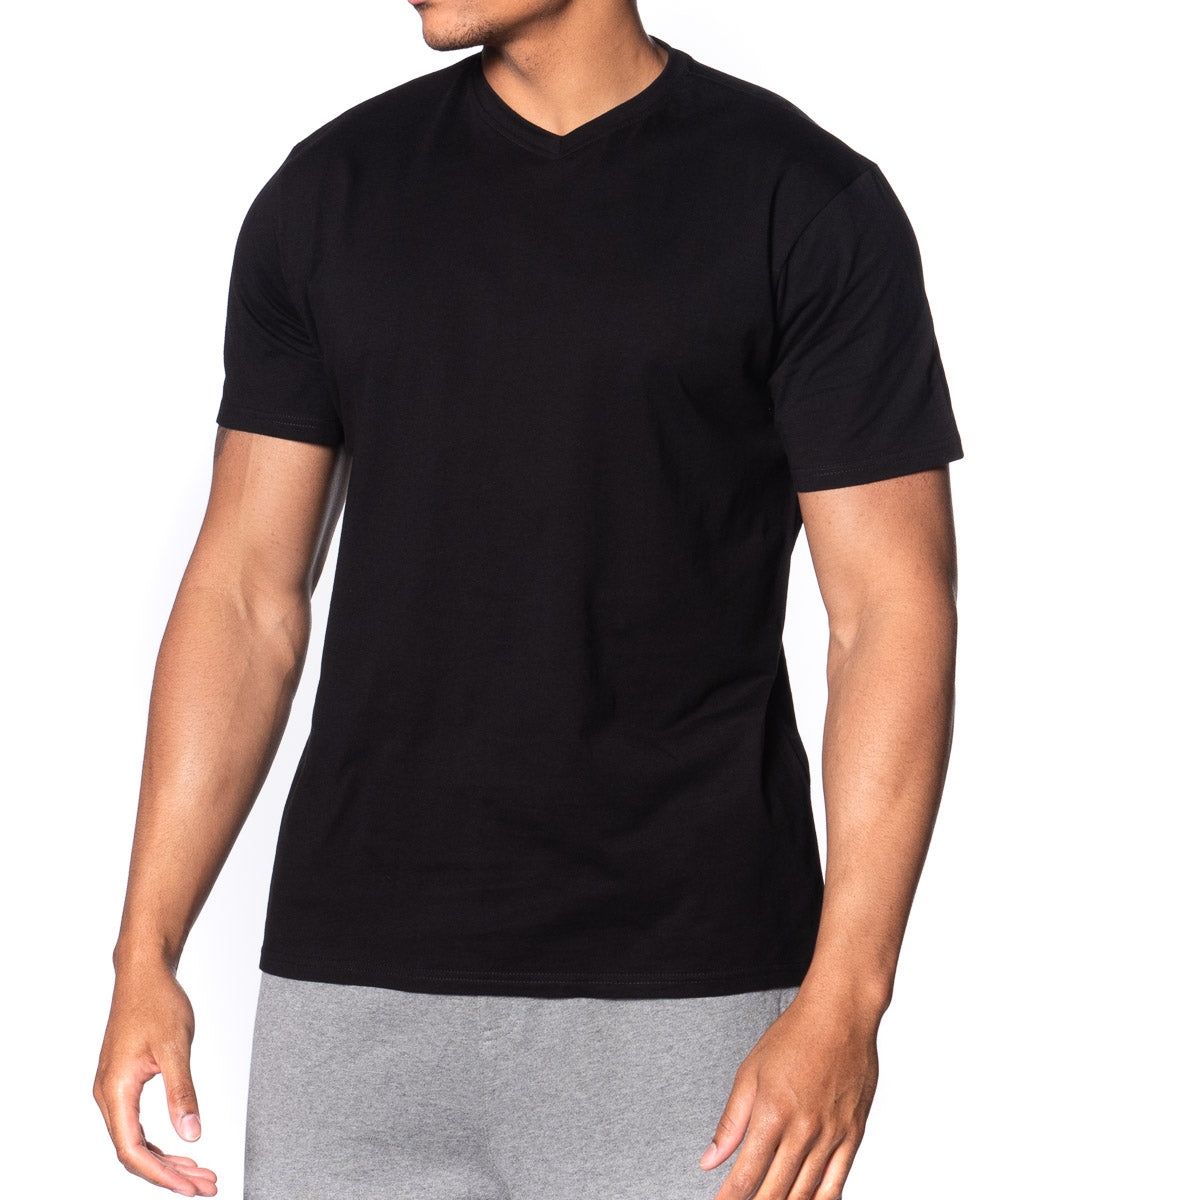 Fitted Vee Neck T-Shirt - Basics